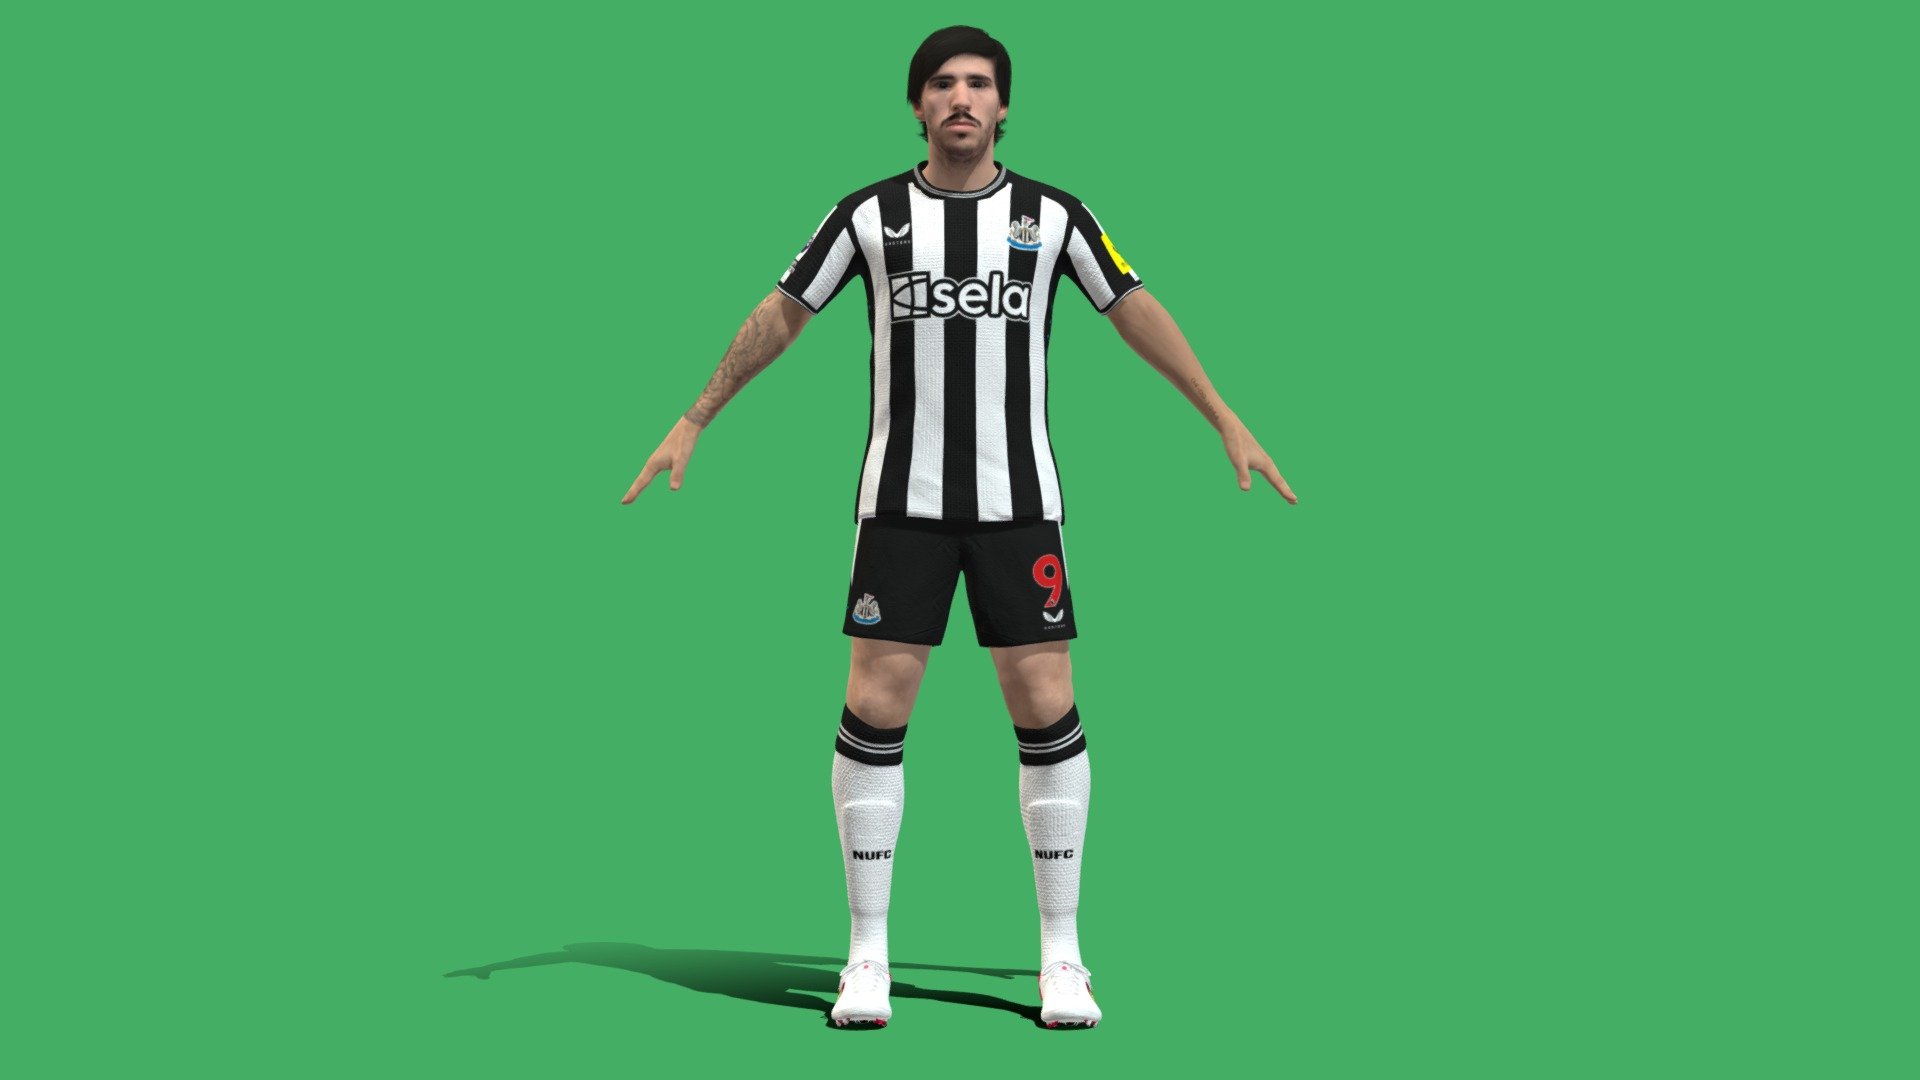 For buy:
https://3dpassion.net/product/3d-rigged-sandro-tonali-newcastle-united-2024/

For contact:
3dpassion3d@gmail.com
telegram: @passion3d




Sandro Tonali is an Italian professional footballer who plays mainly as a defensive or central midfielder for Premier League club Newcastle United and the Italy national team.

Model is created in 3ds Max, export to Fbx file

Very simple to import Fbx into C4D, Maya, Blender, Sketchup&hellip;

Format:




3ds Max 2020 standard materials

Maya 2018

Blender 2.91

C4D r19

Fbx

Obj

Dwg

Glb
 - 3D Rigged Sandro Tonali Newcastle United 2024 - 3D model by changjinew 3d model